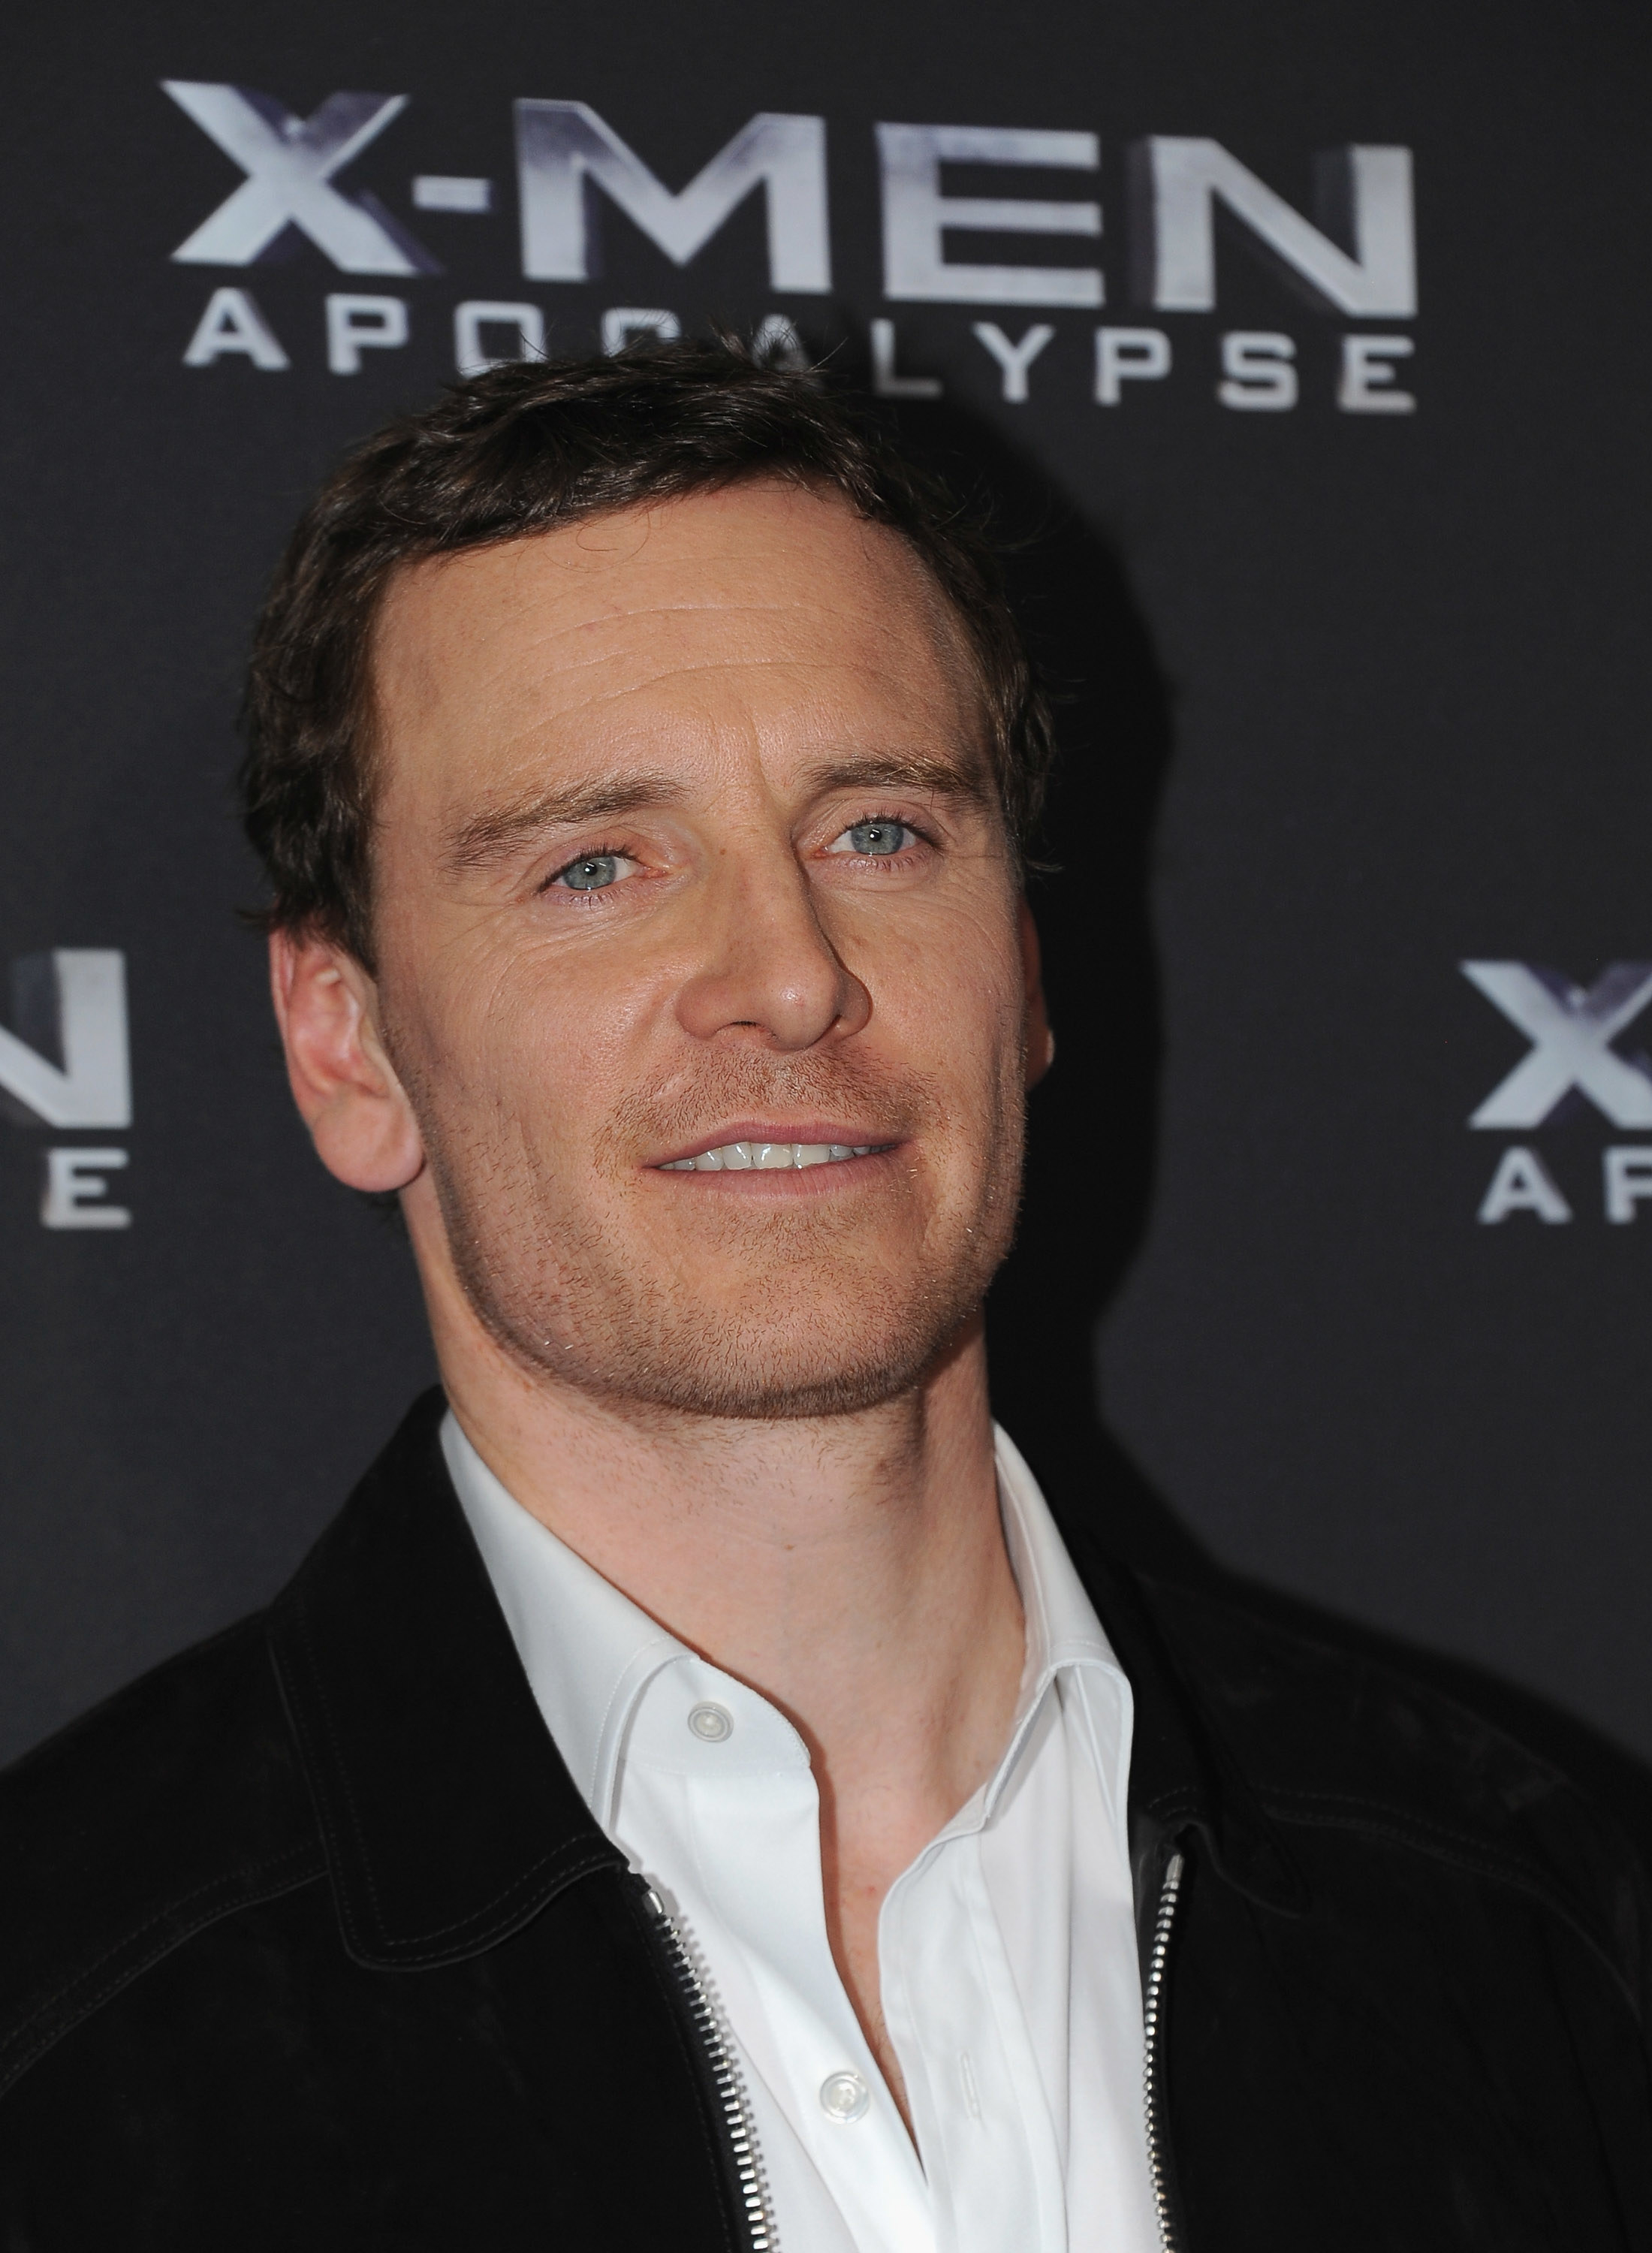 Head and shoulders shot of Michael smiling in a white shirt with a black zipped jacket at the X-Men Apocalypse premiere